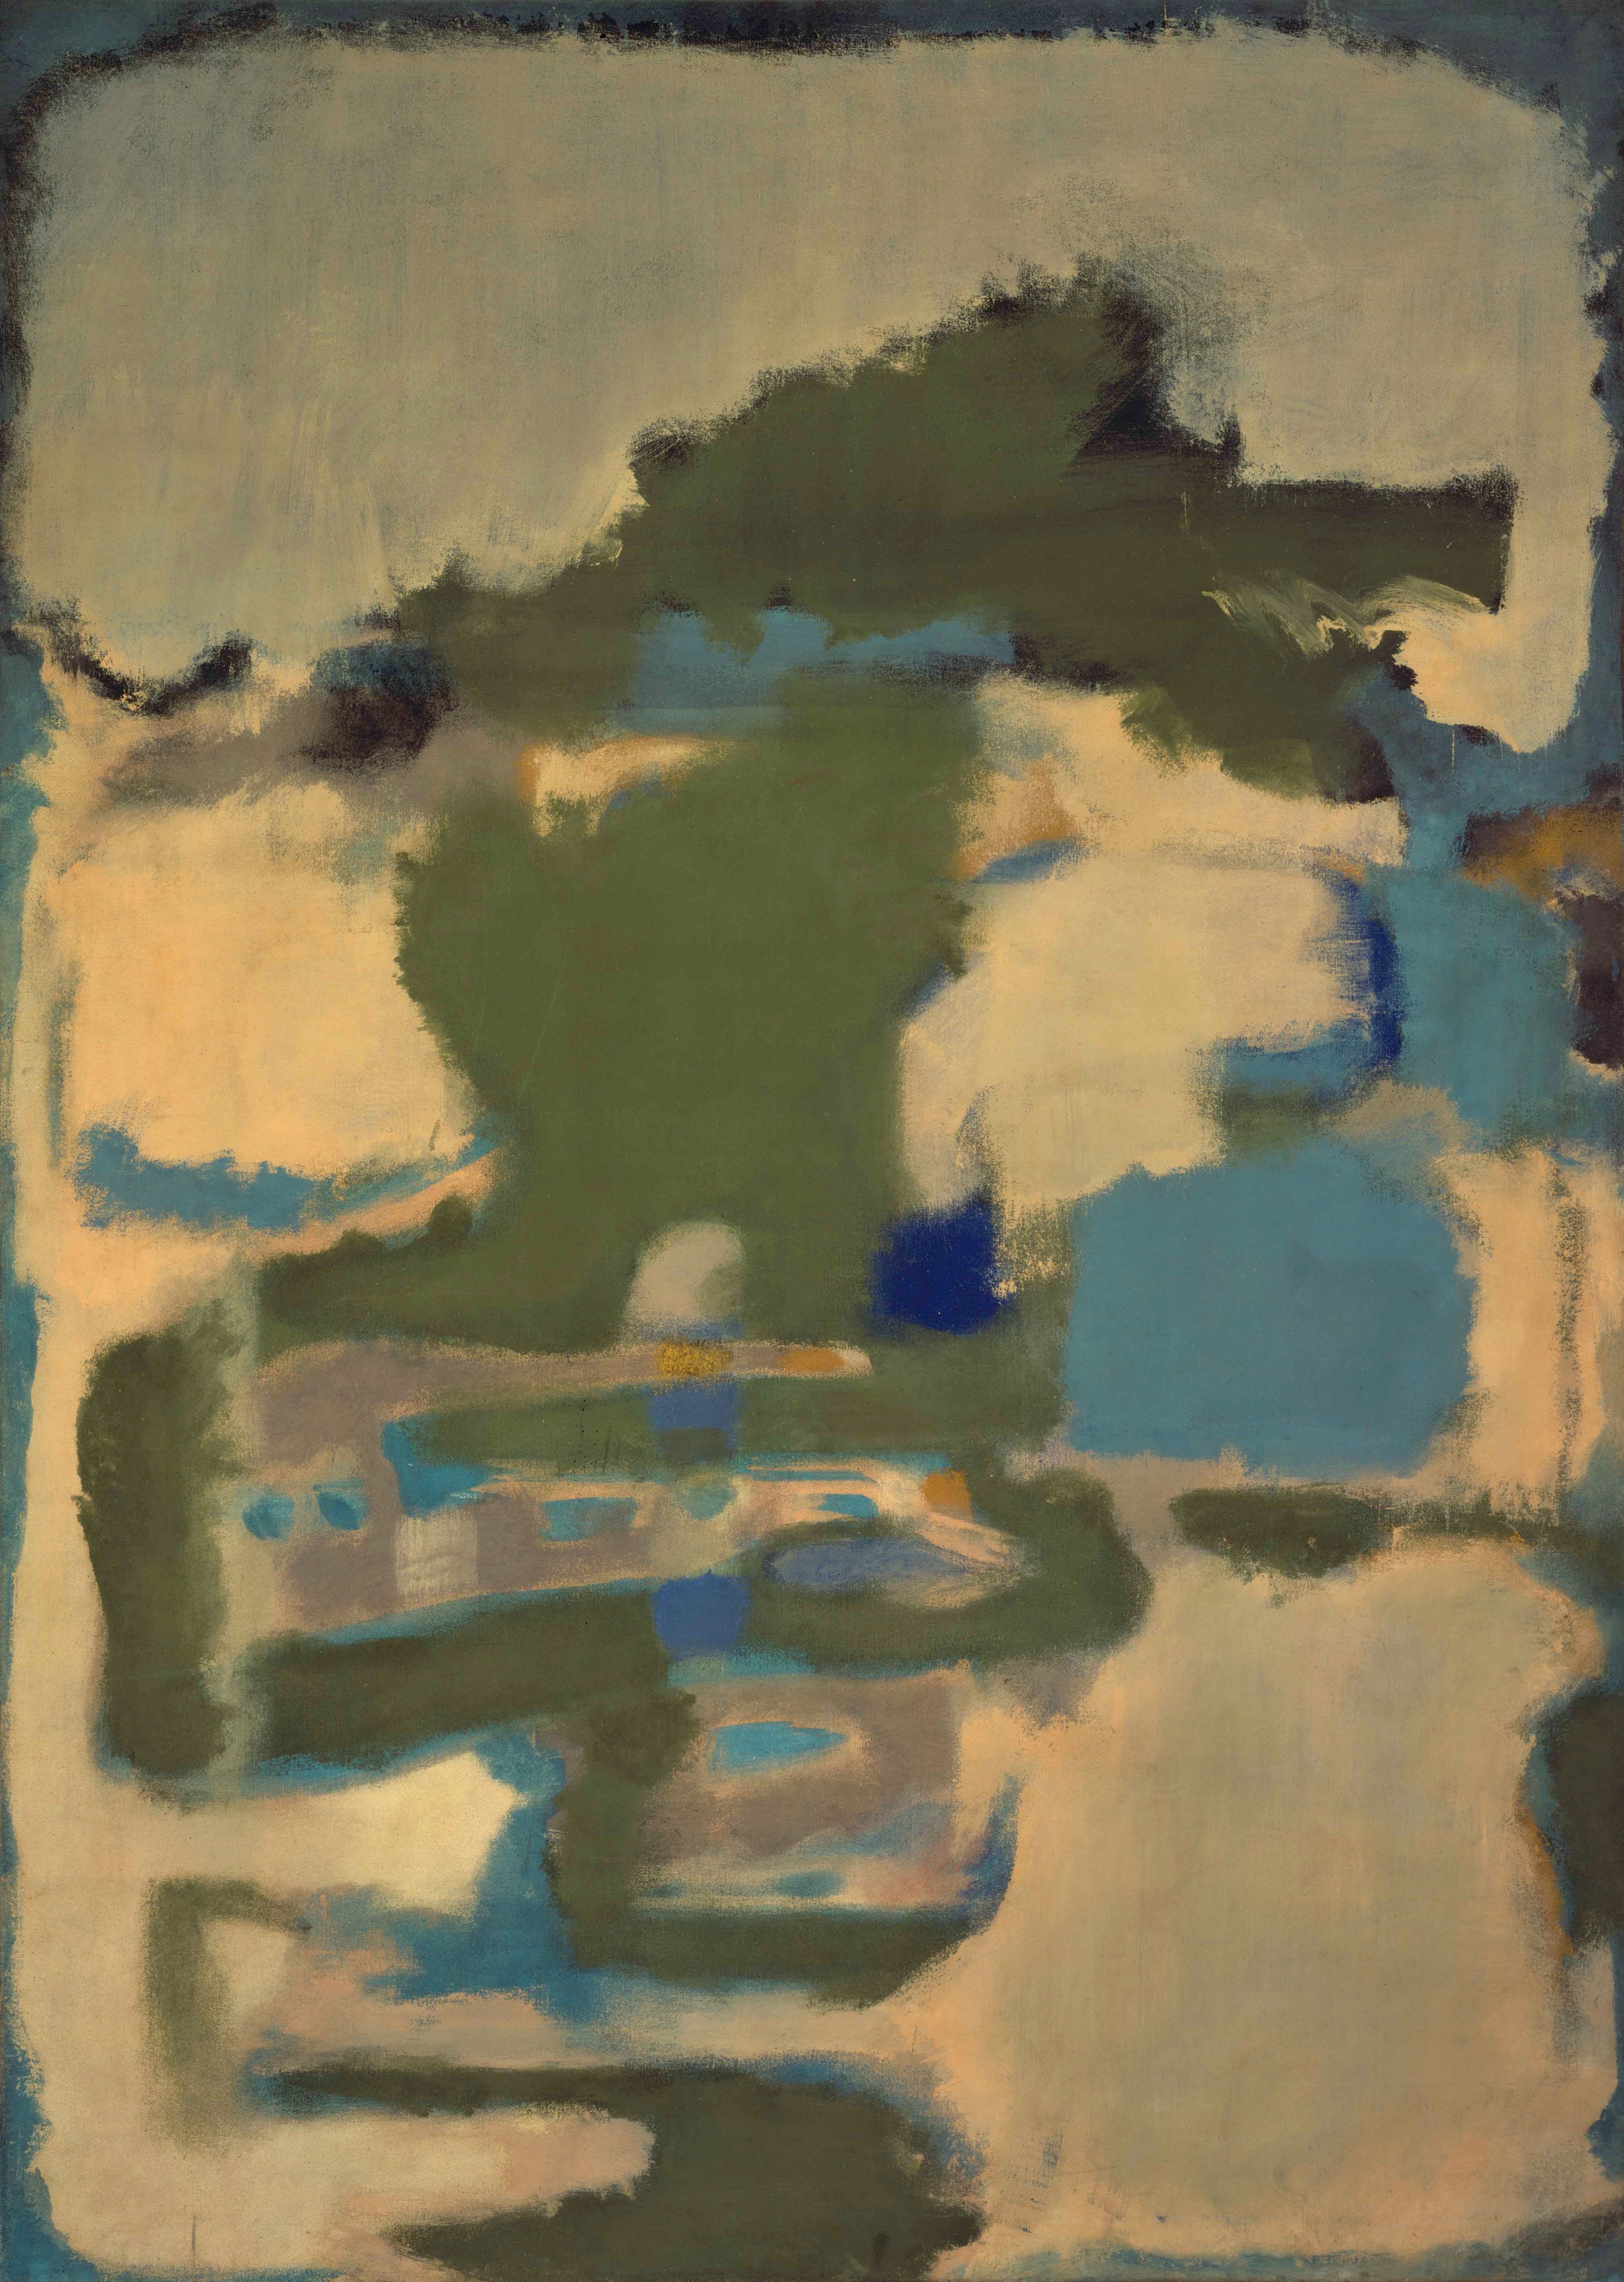 picture for Mark Rothko, Untitled, 1948, Oil on canvas, 54 1/8 x 38 3/8 inches, Collection of Christopher Rothko, ©1998 by Kate Rothko Prizel and Christopher Rothko.